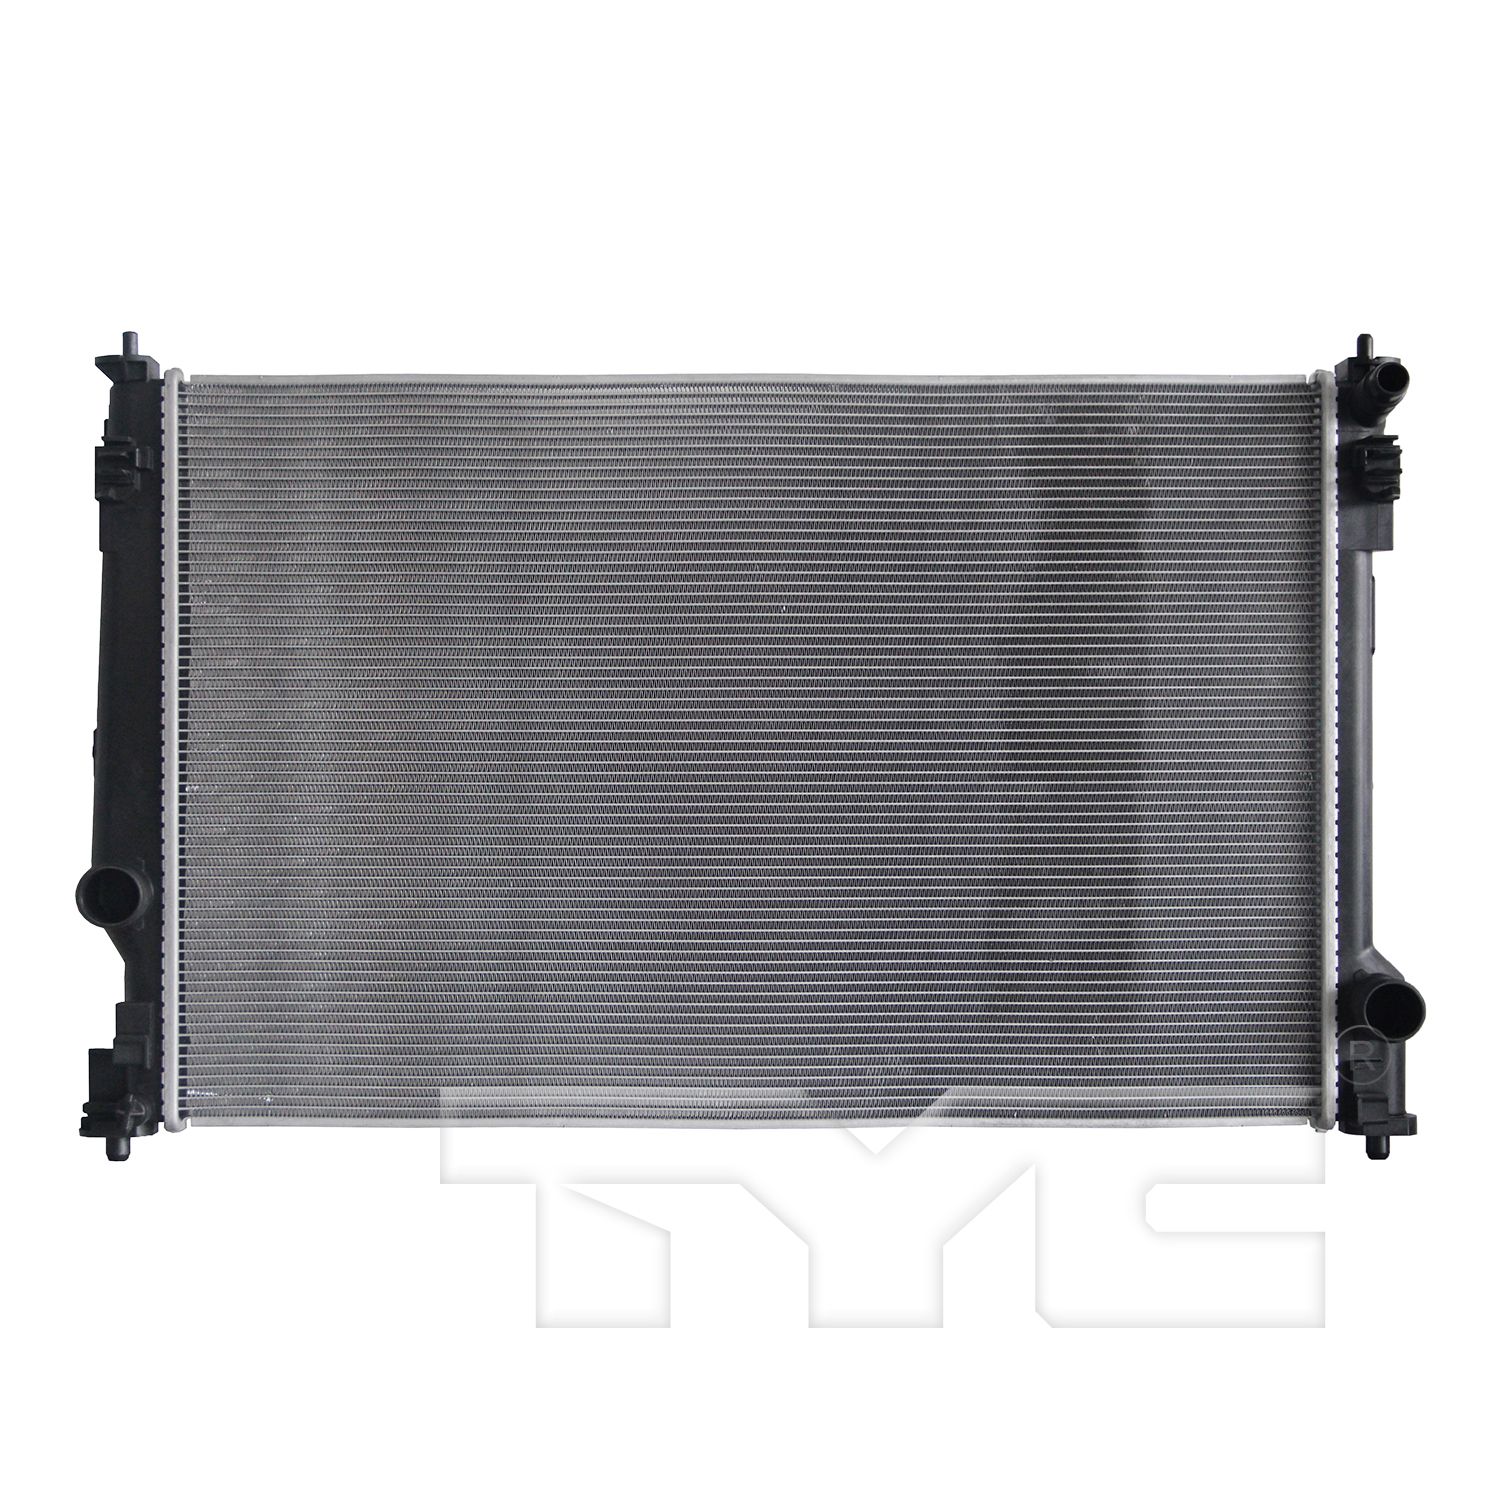 Aftermarket RADIATORS for TOYOTA - CAMRY, CAMRY,18-22,Radiator assembly